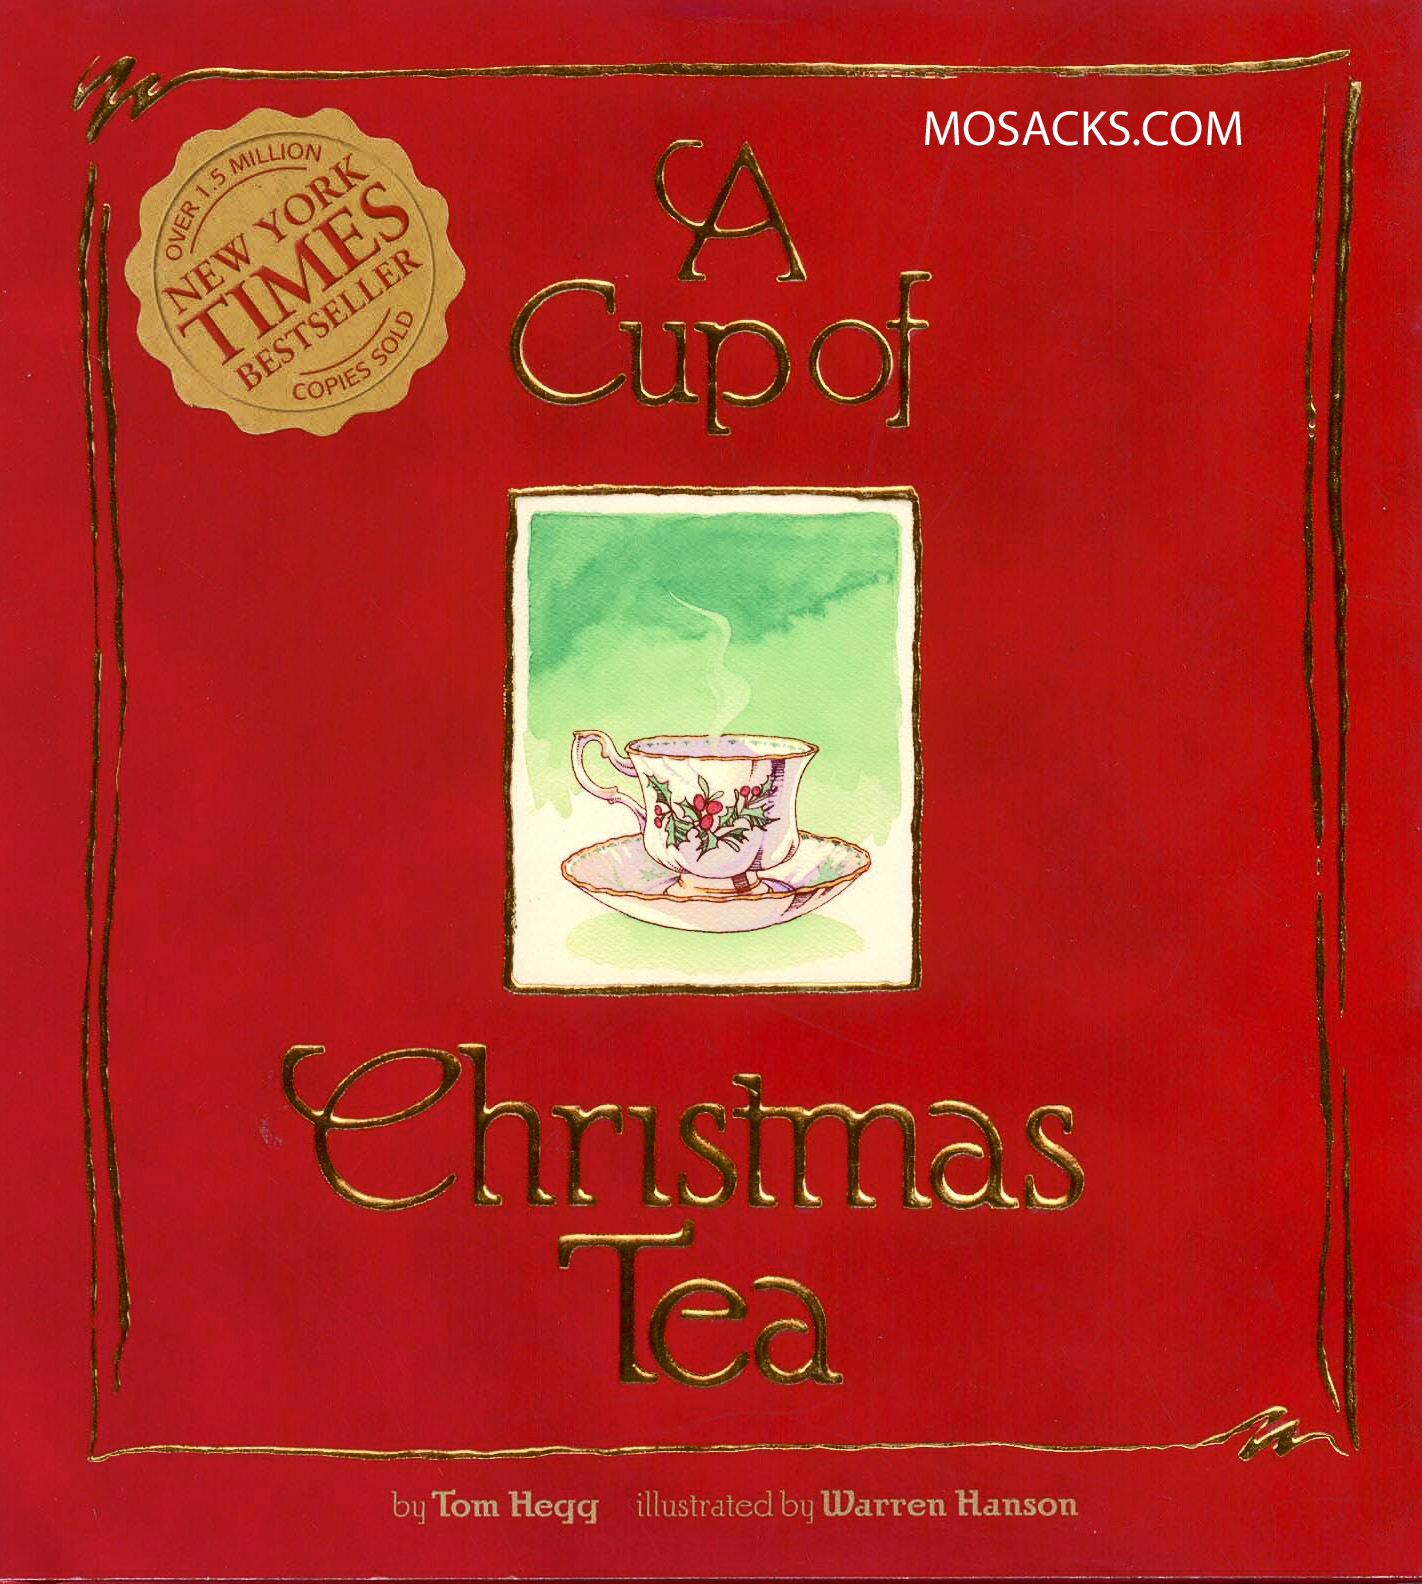 A Cup of Christmas Tea by Tom Hegg - New Edition coming